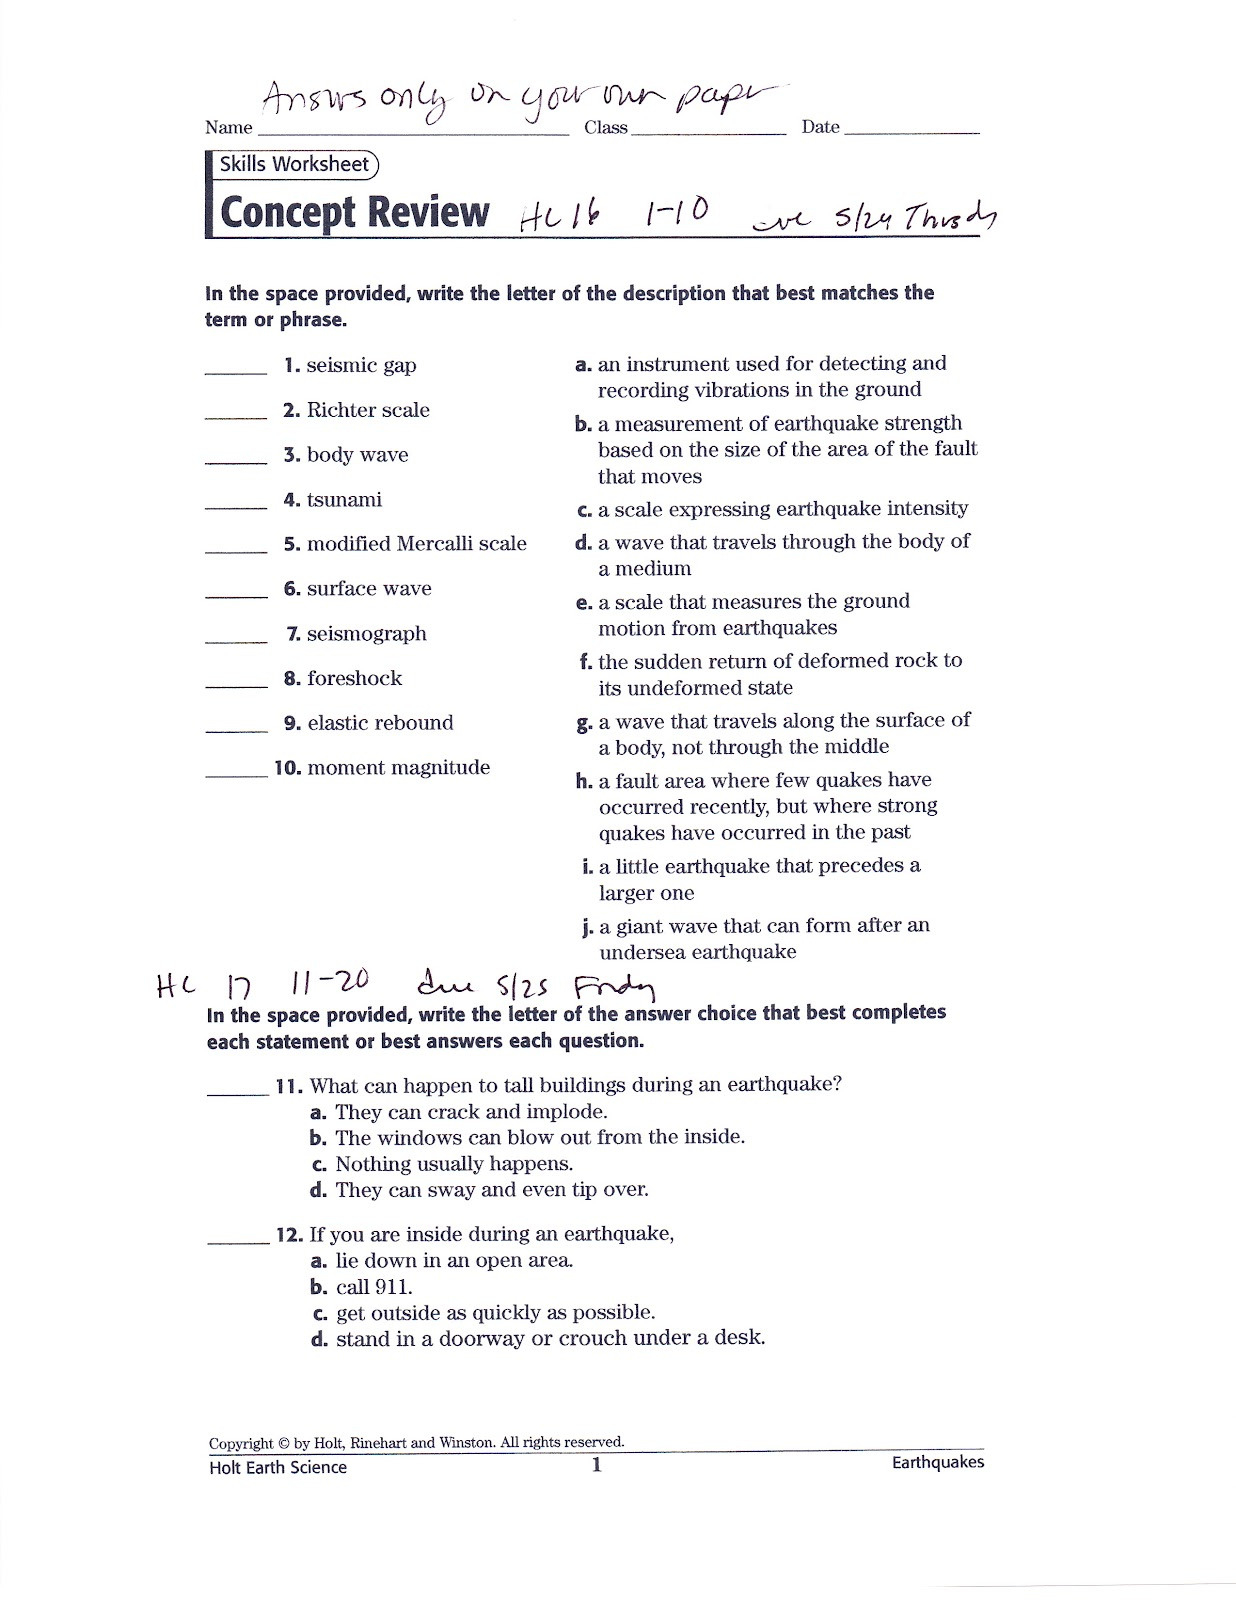 prentice-hall-english-11-worksheet-answers-learning-sample-db-excel